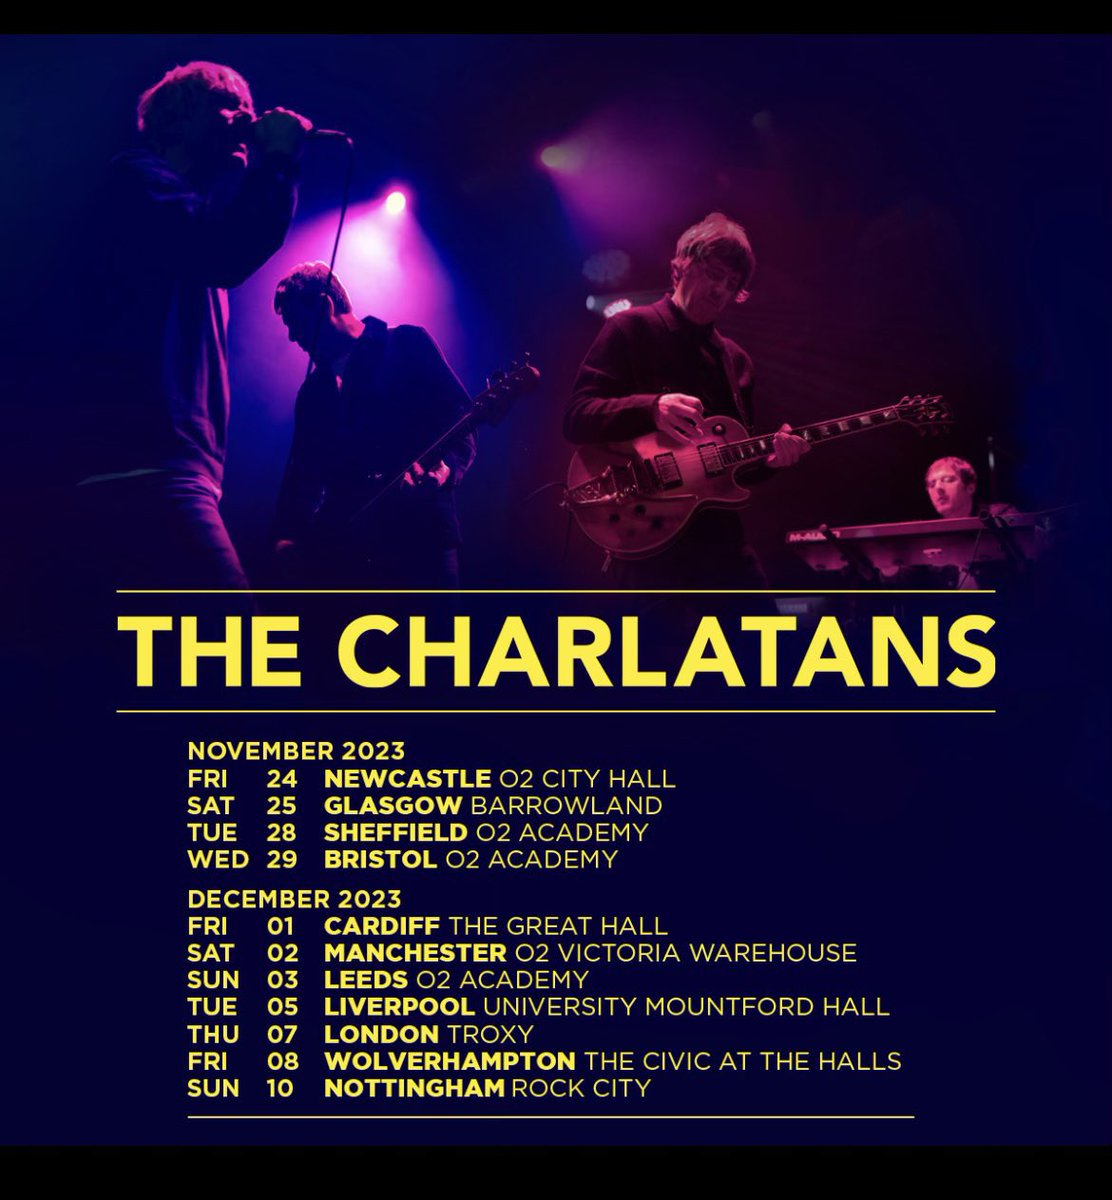 Bristol for me 🤞🏻
#TimsTicketGiveaway 
Where you hoping for?
@thecharlatans are back baby!!